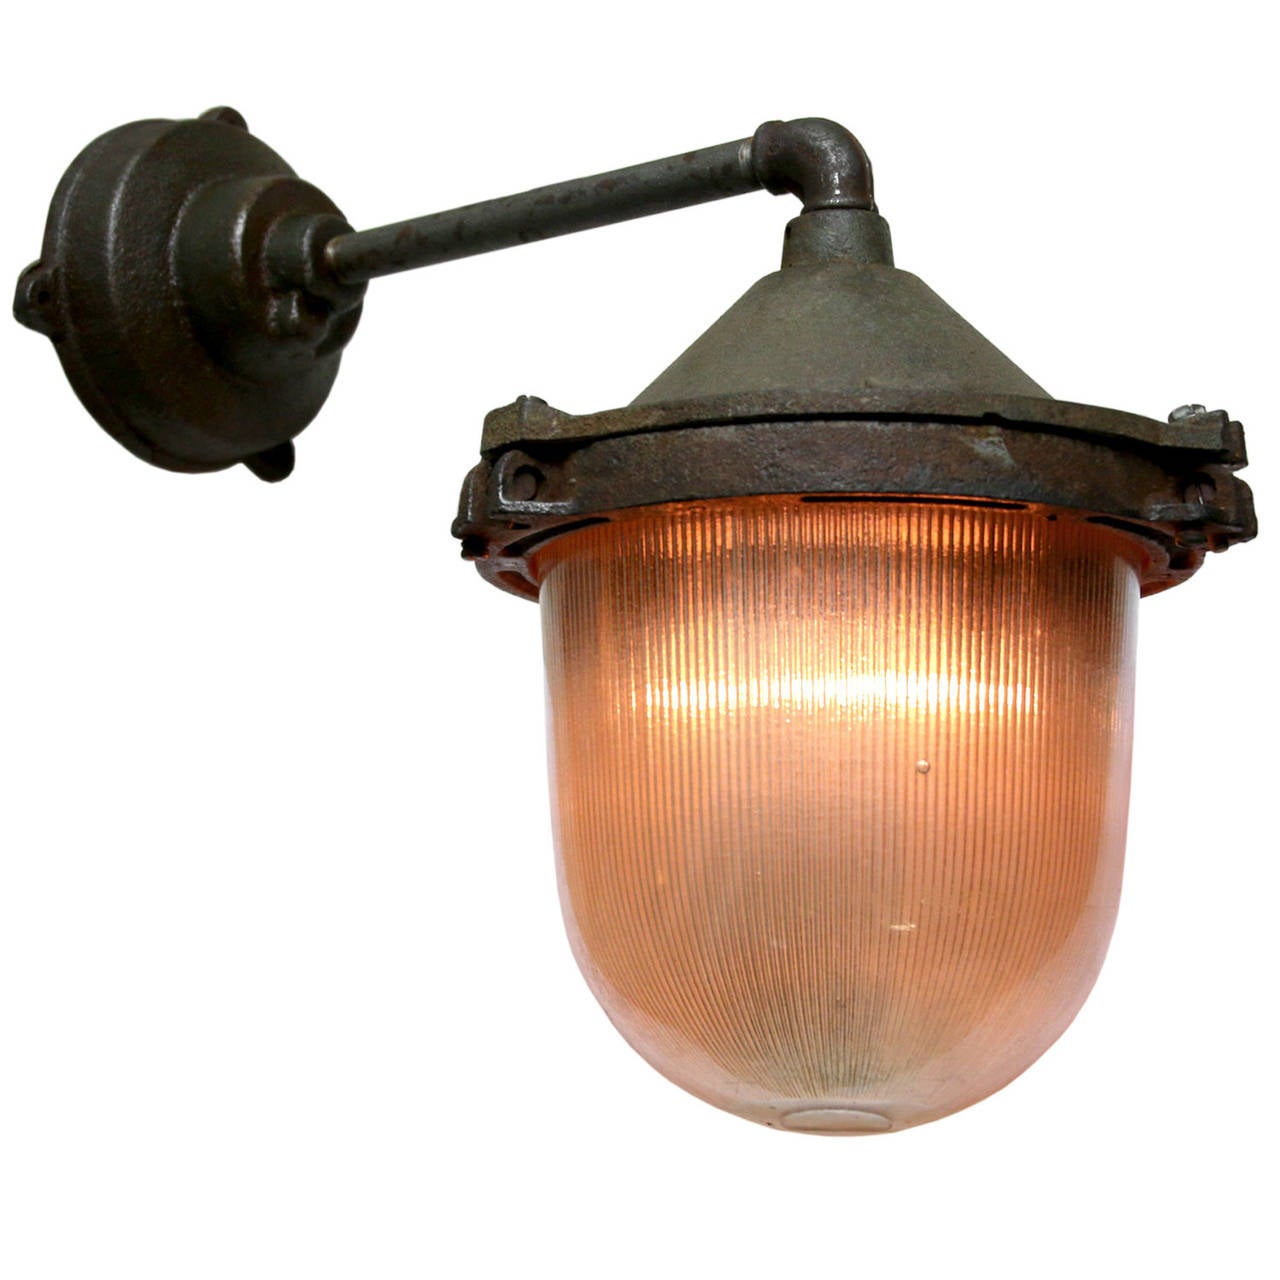 Cast iron industrial wall light. Holophane glass. weight: 7.5 kg / 16.5 lb. For use outdoors as well as indoors. 

All lamps have been made suitable by international standards for incandescent light bulbs, energy-efficient and LED bulbs with an